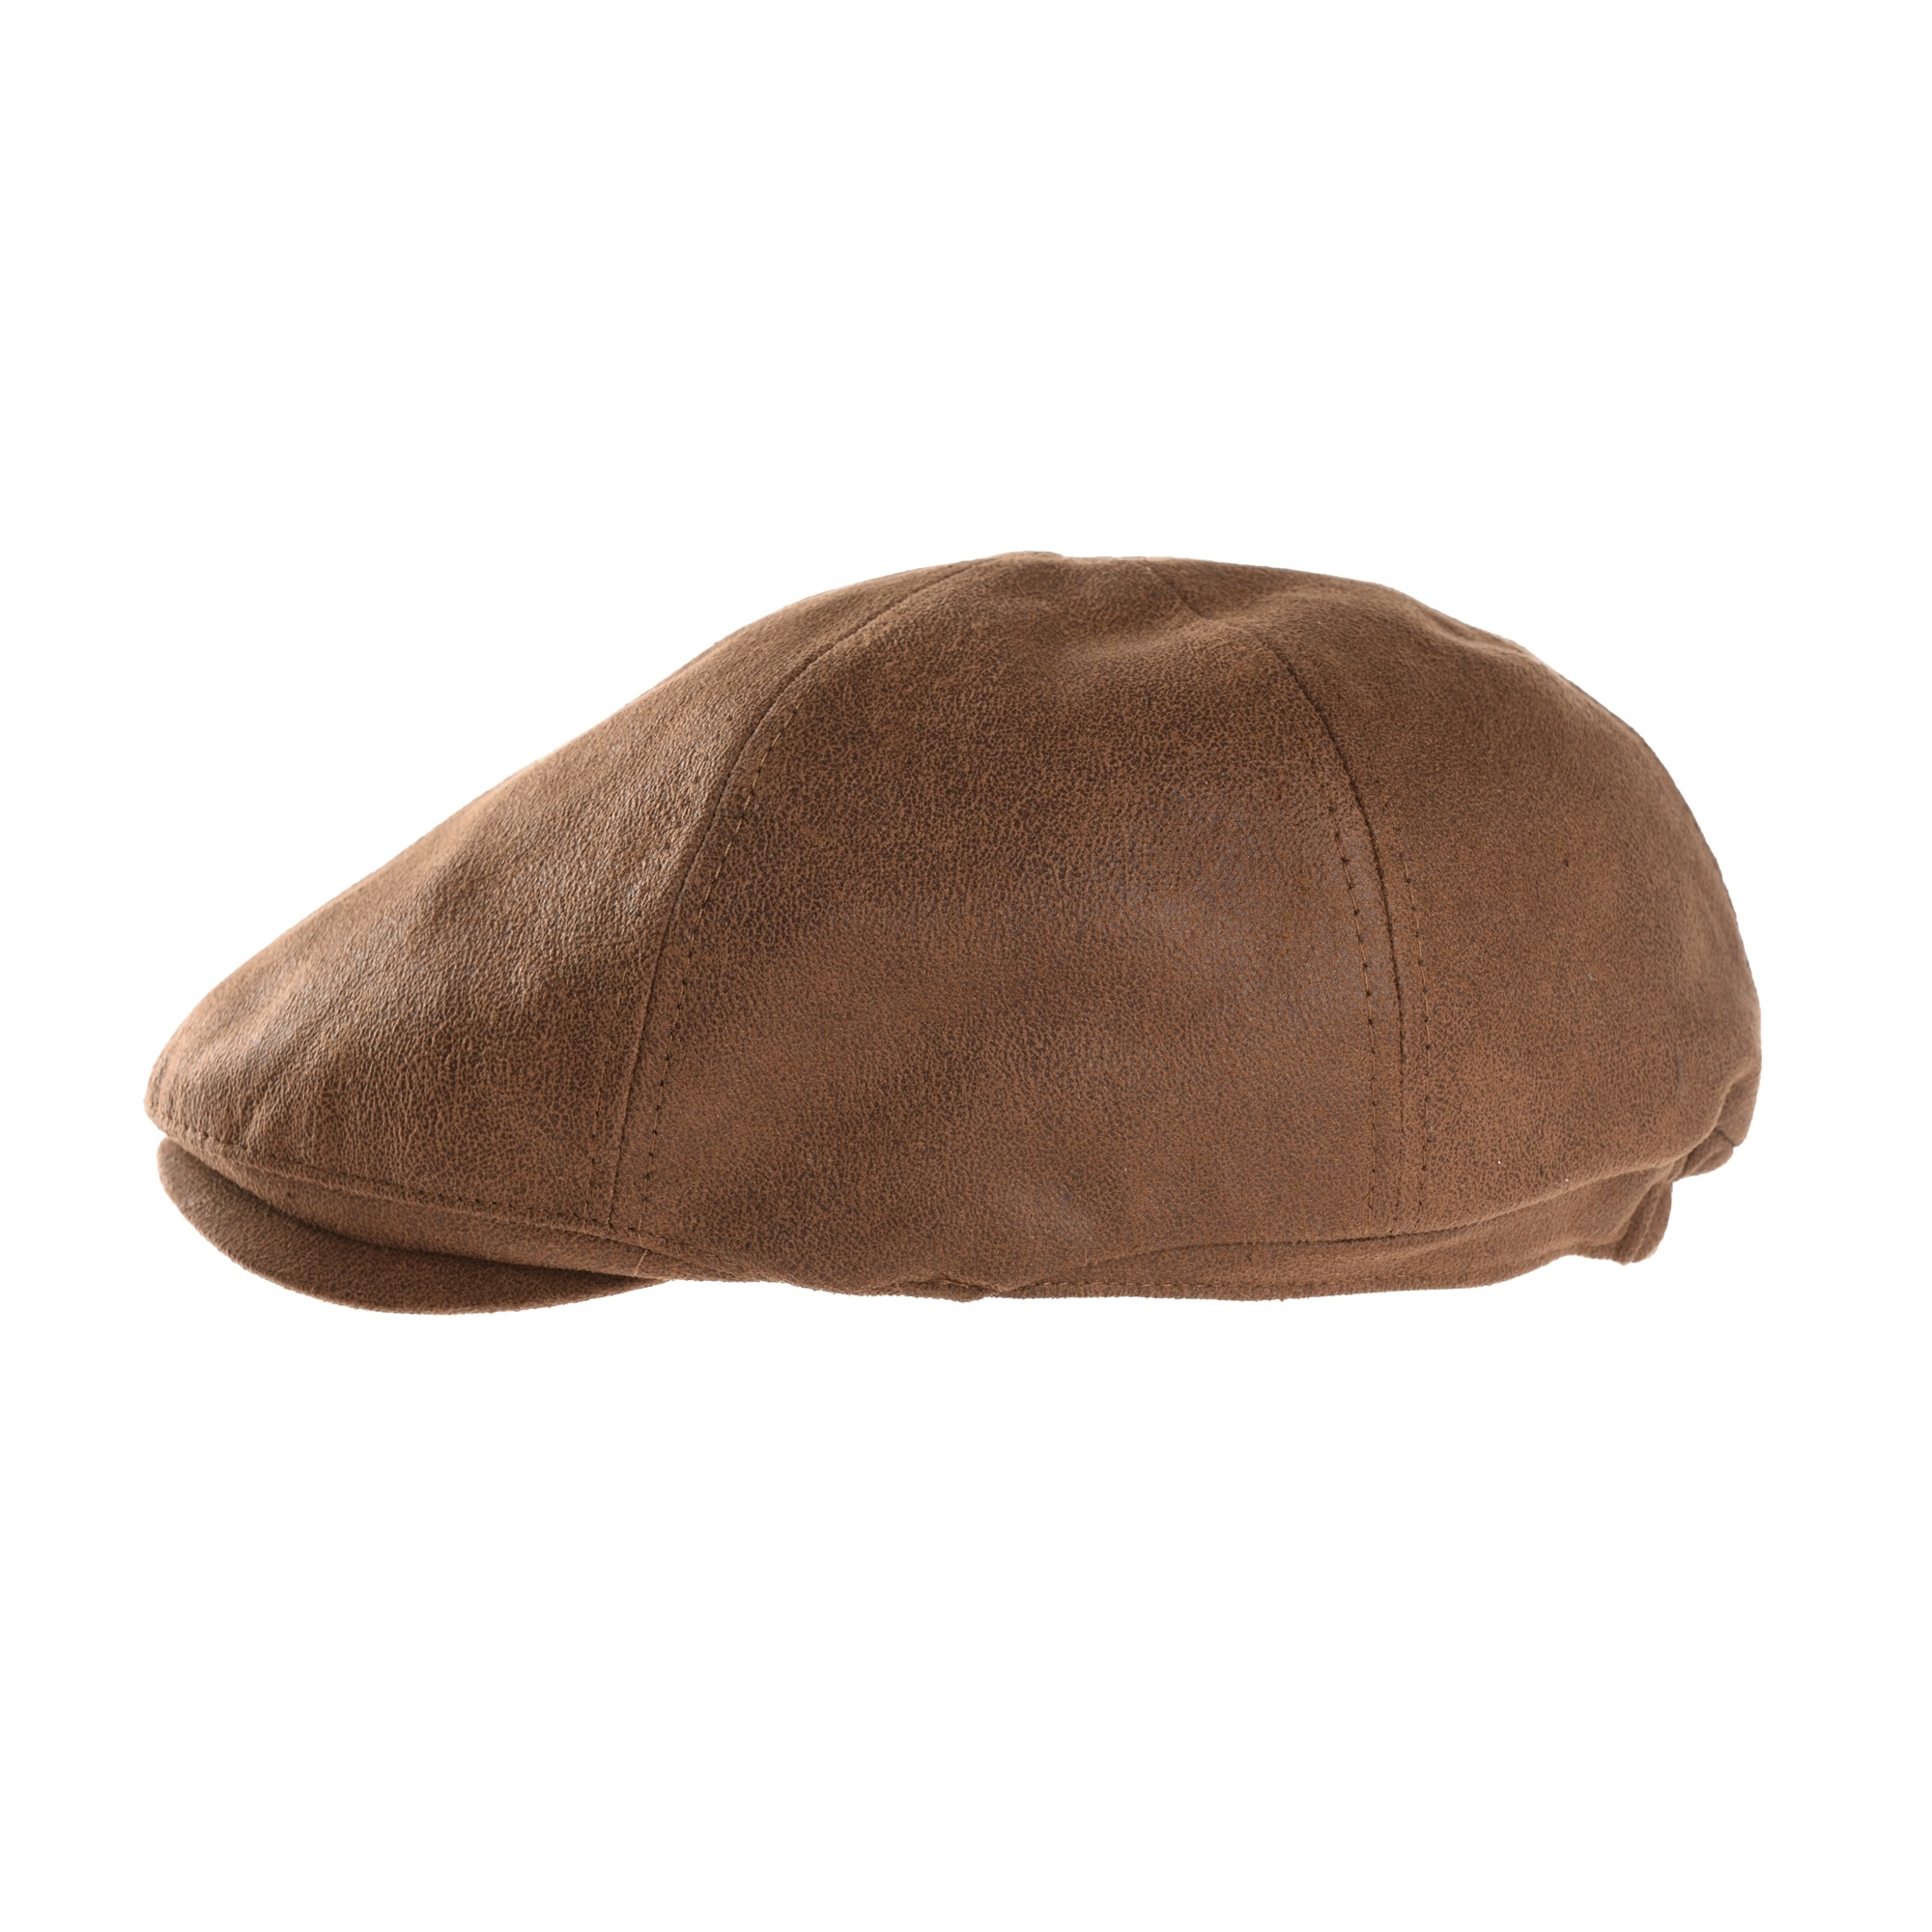 WITHMOONS Ivy Flat Cap Simple Classic Faux Leather Gatsby Hat SL3857 | eBay